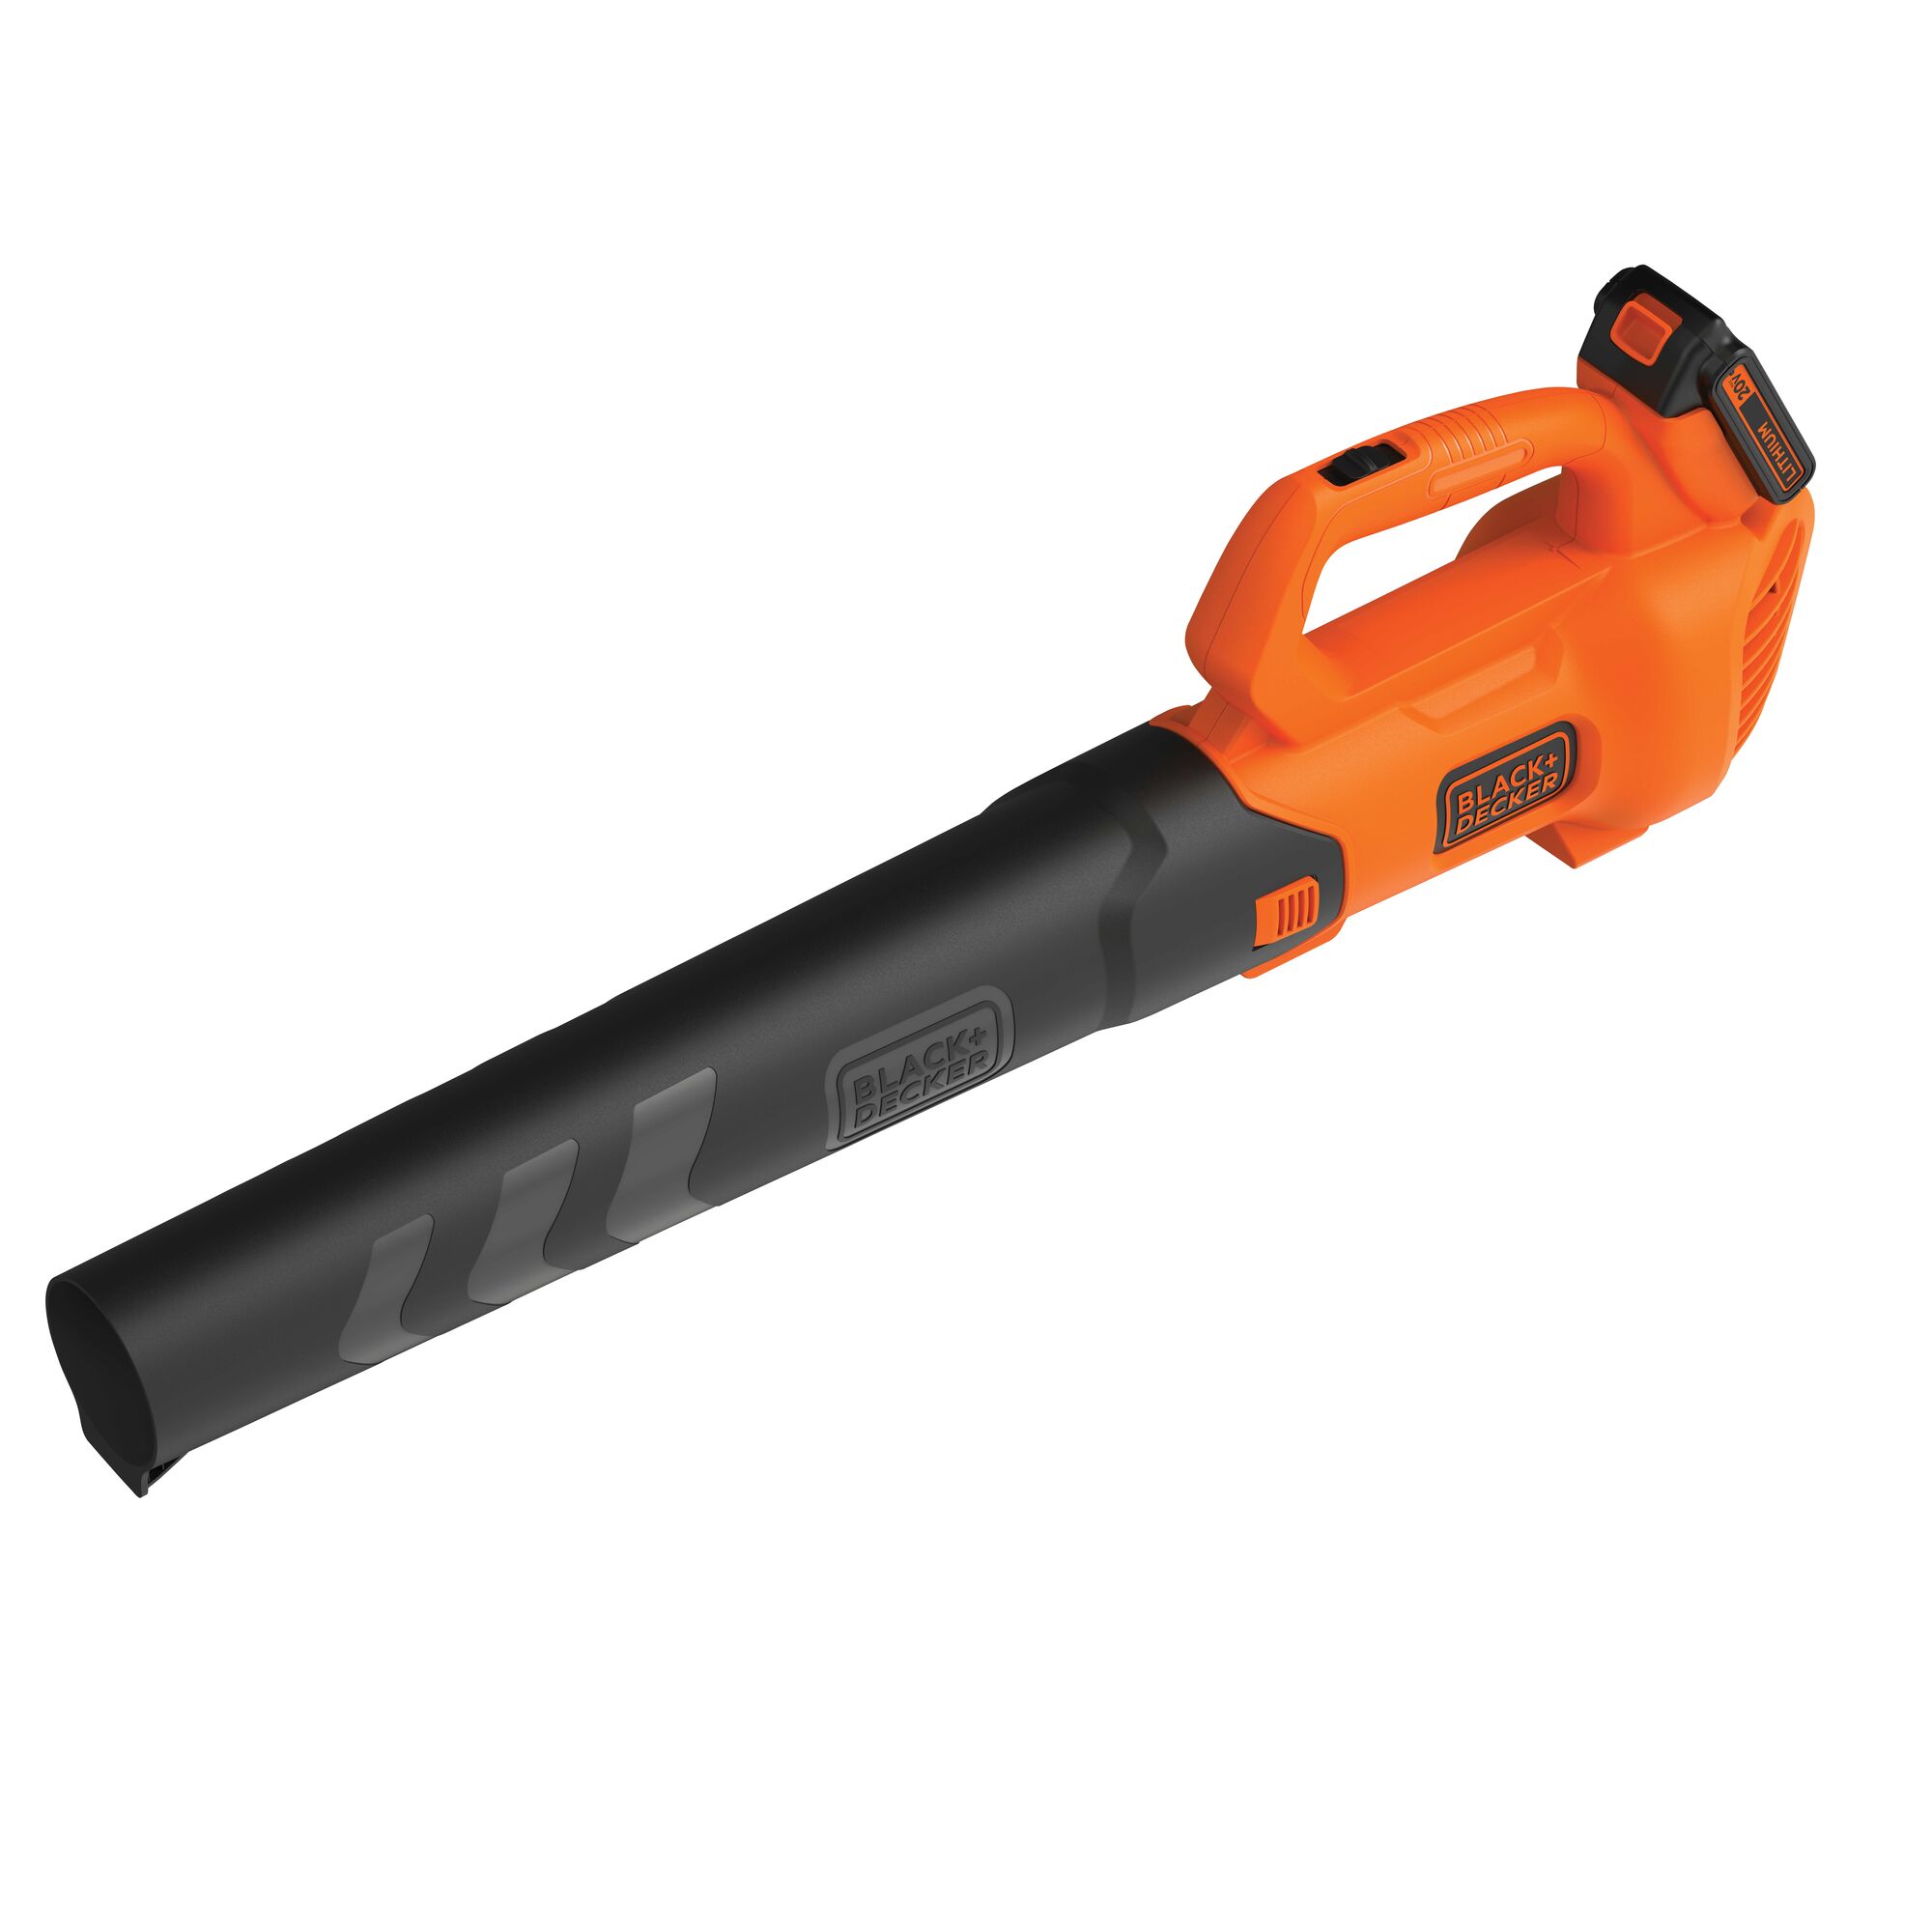 Profile of 20 volt max axial leaf blower and string trimmer combo kit.